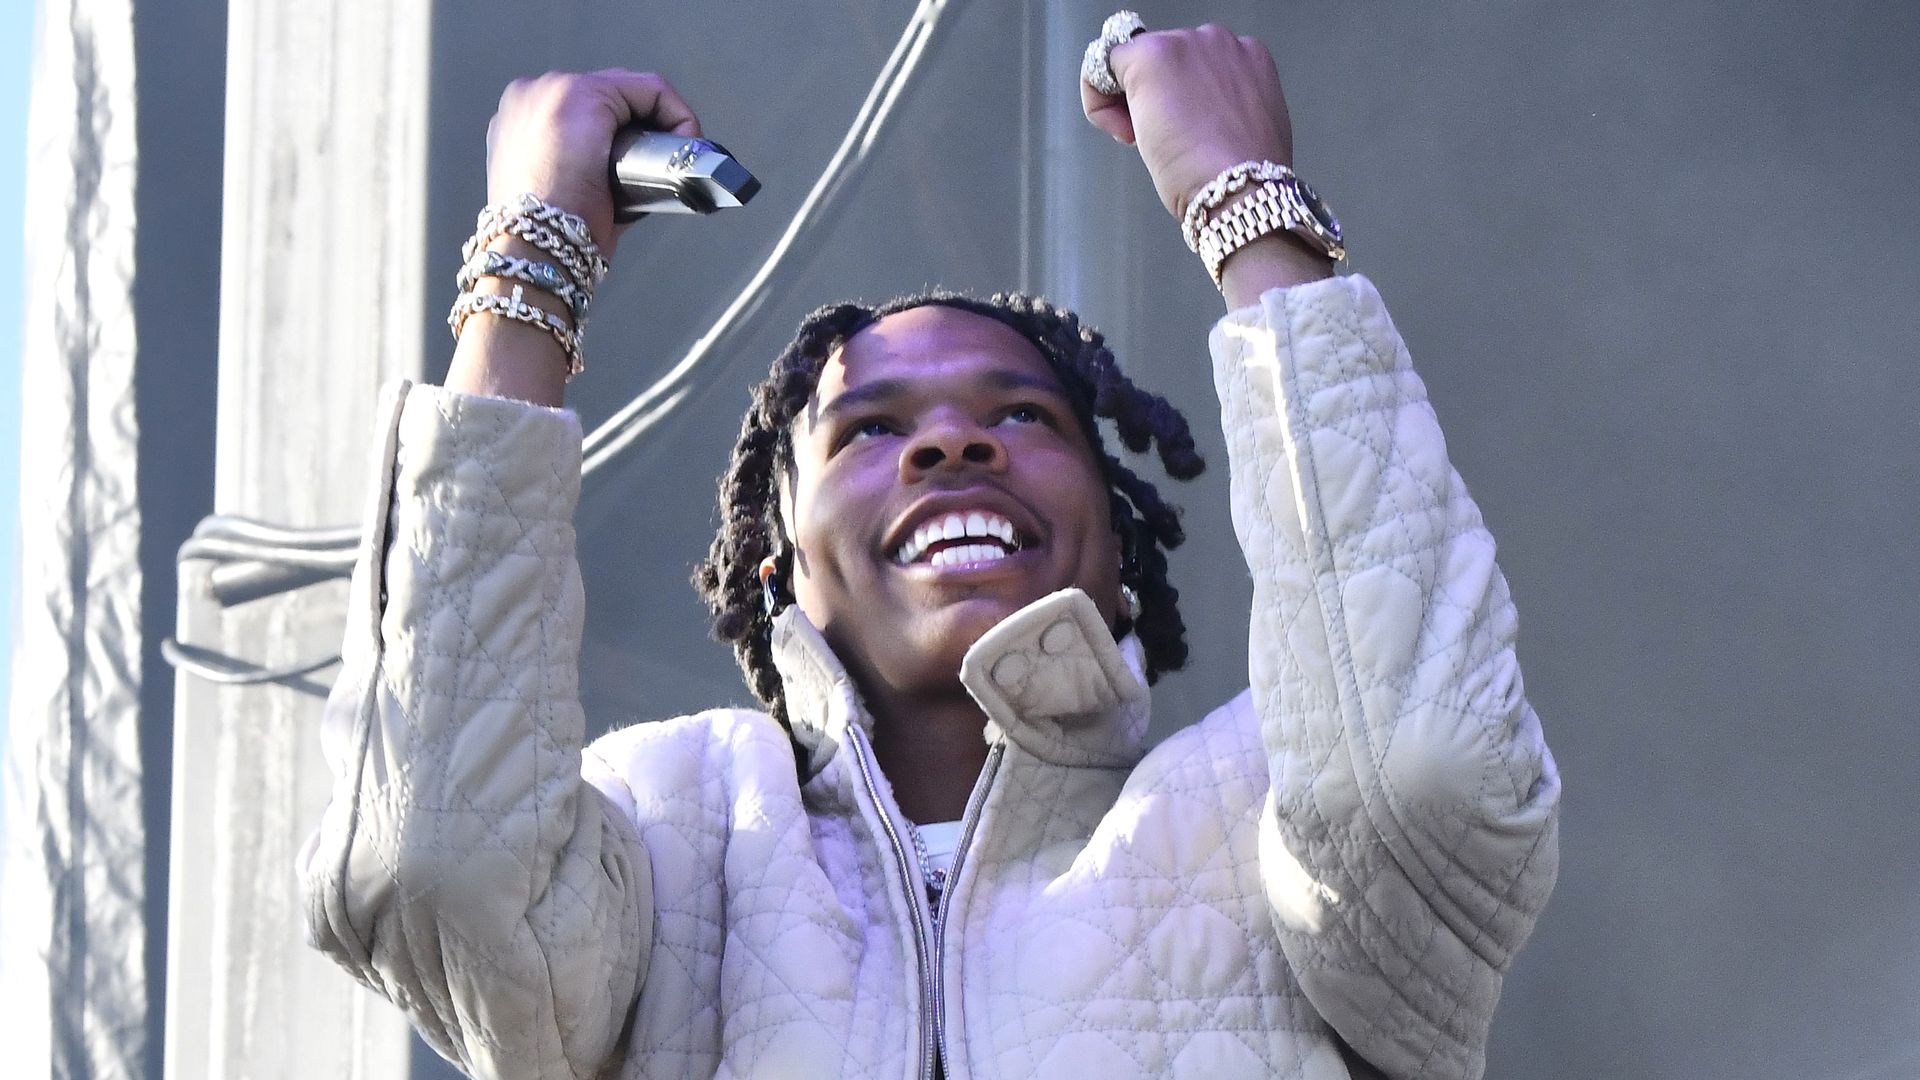 Lil Baby performs onstage during Poguelandia: An Outer Banks Experience on February 18, 2023 in Huntington Beach, California.